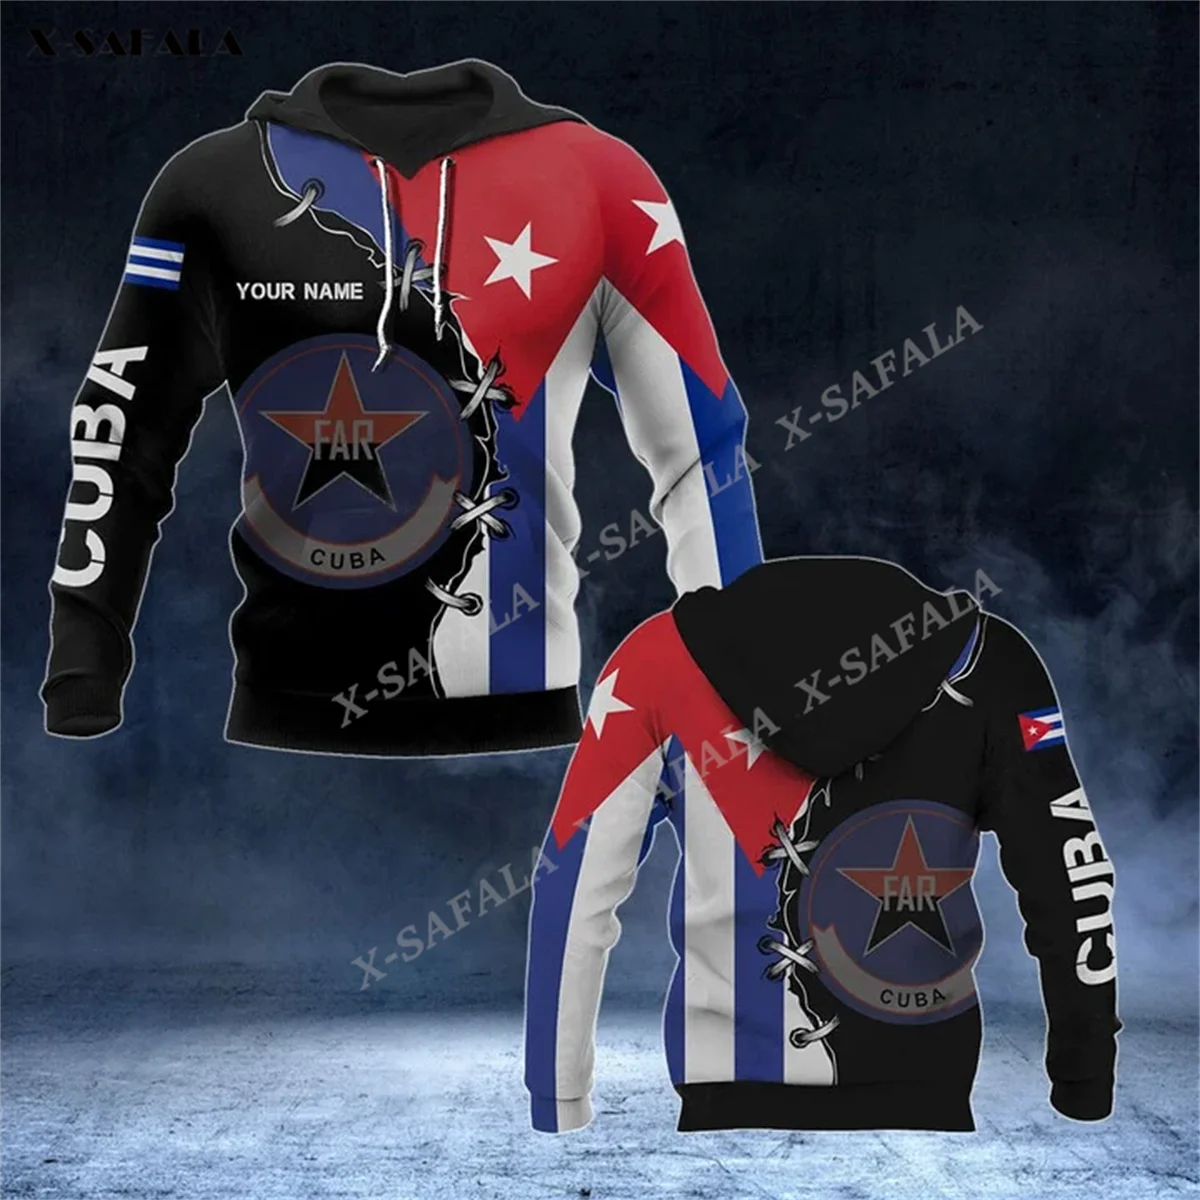 

CUBA COAT OF ARMS FLAG MAP 3D Printed Zipper Hoodie Men Pullover Sweatshirt Hooded Jersey Tracksuits Outwear Coat Warm Cotton